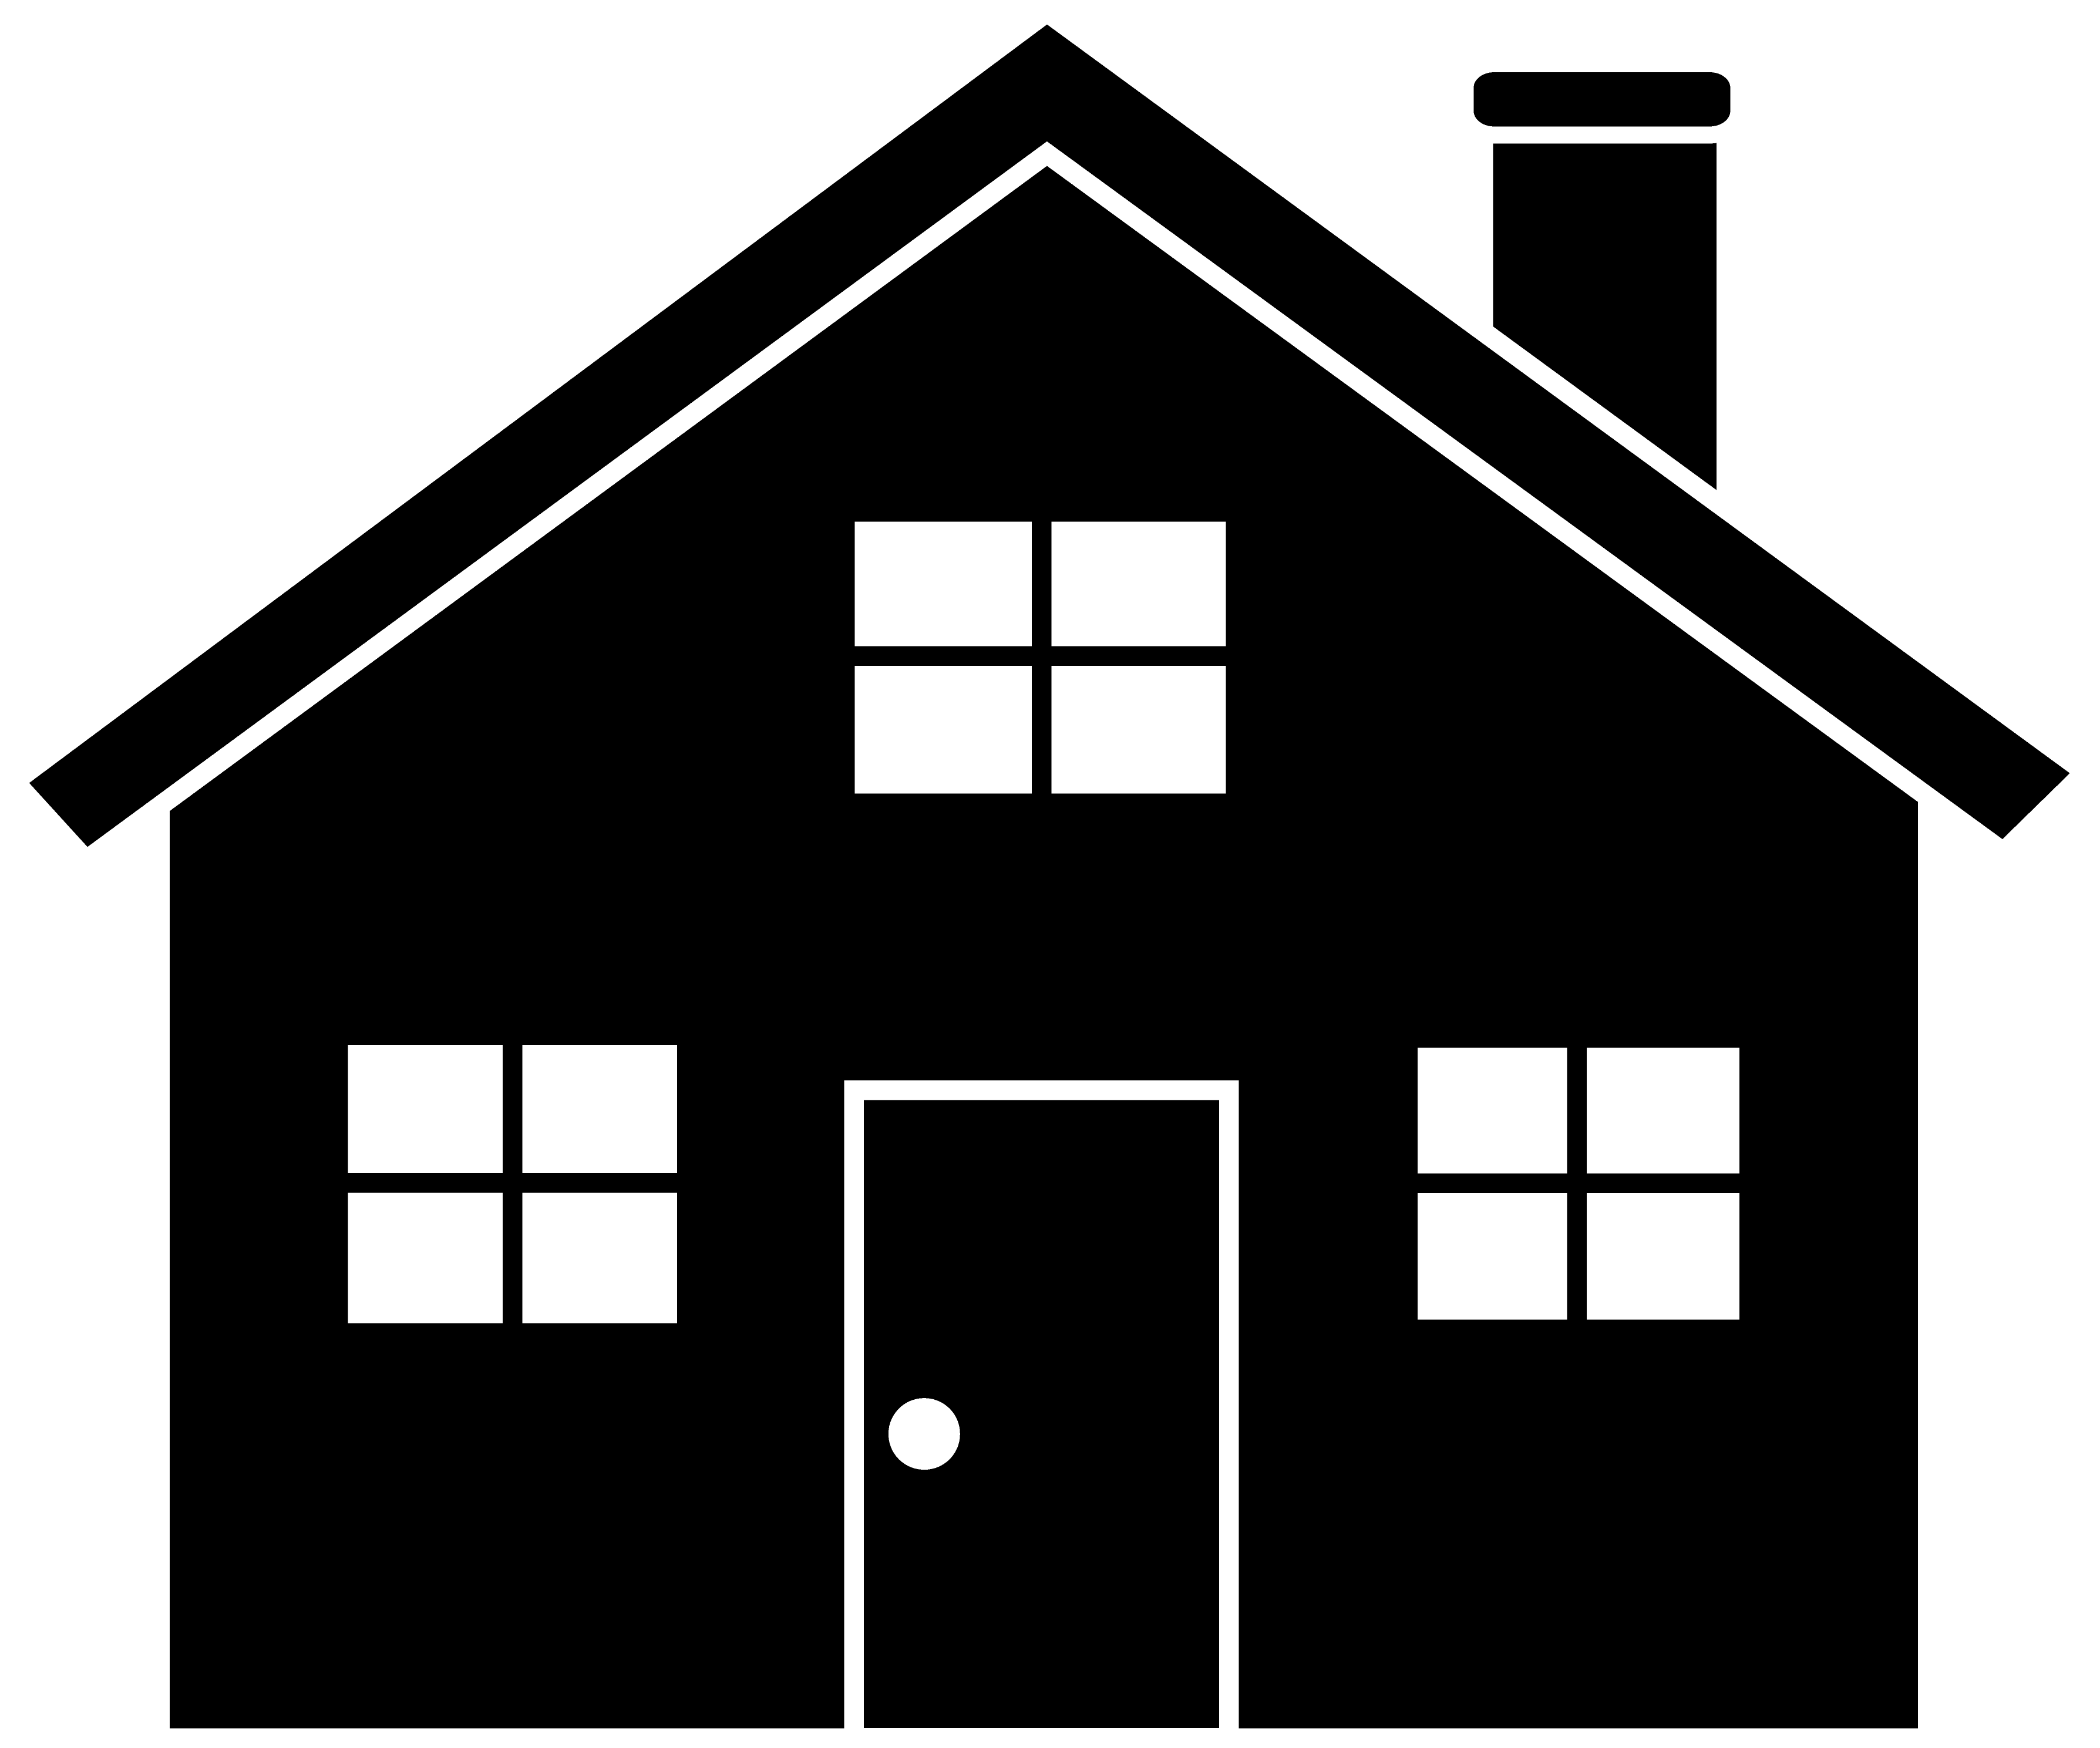 Tuna clipart commercial. Image of house black